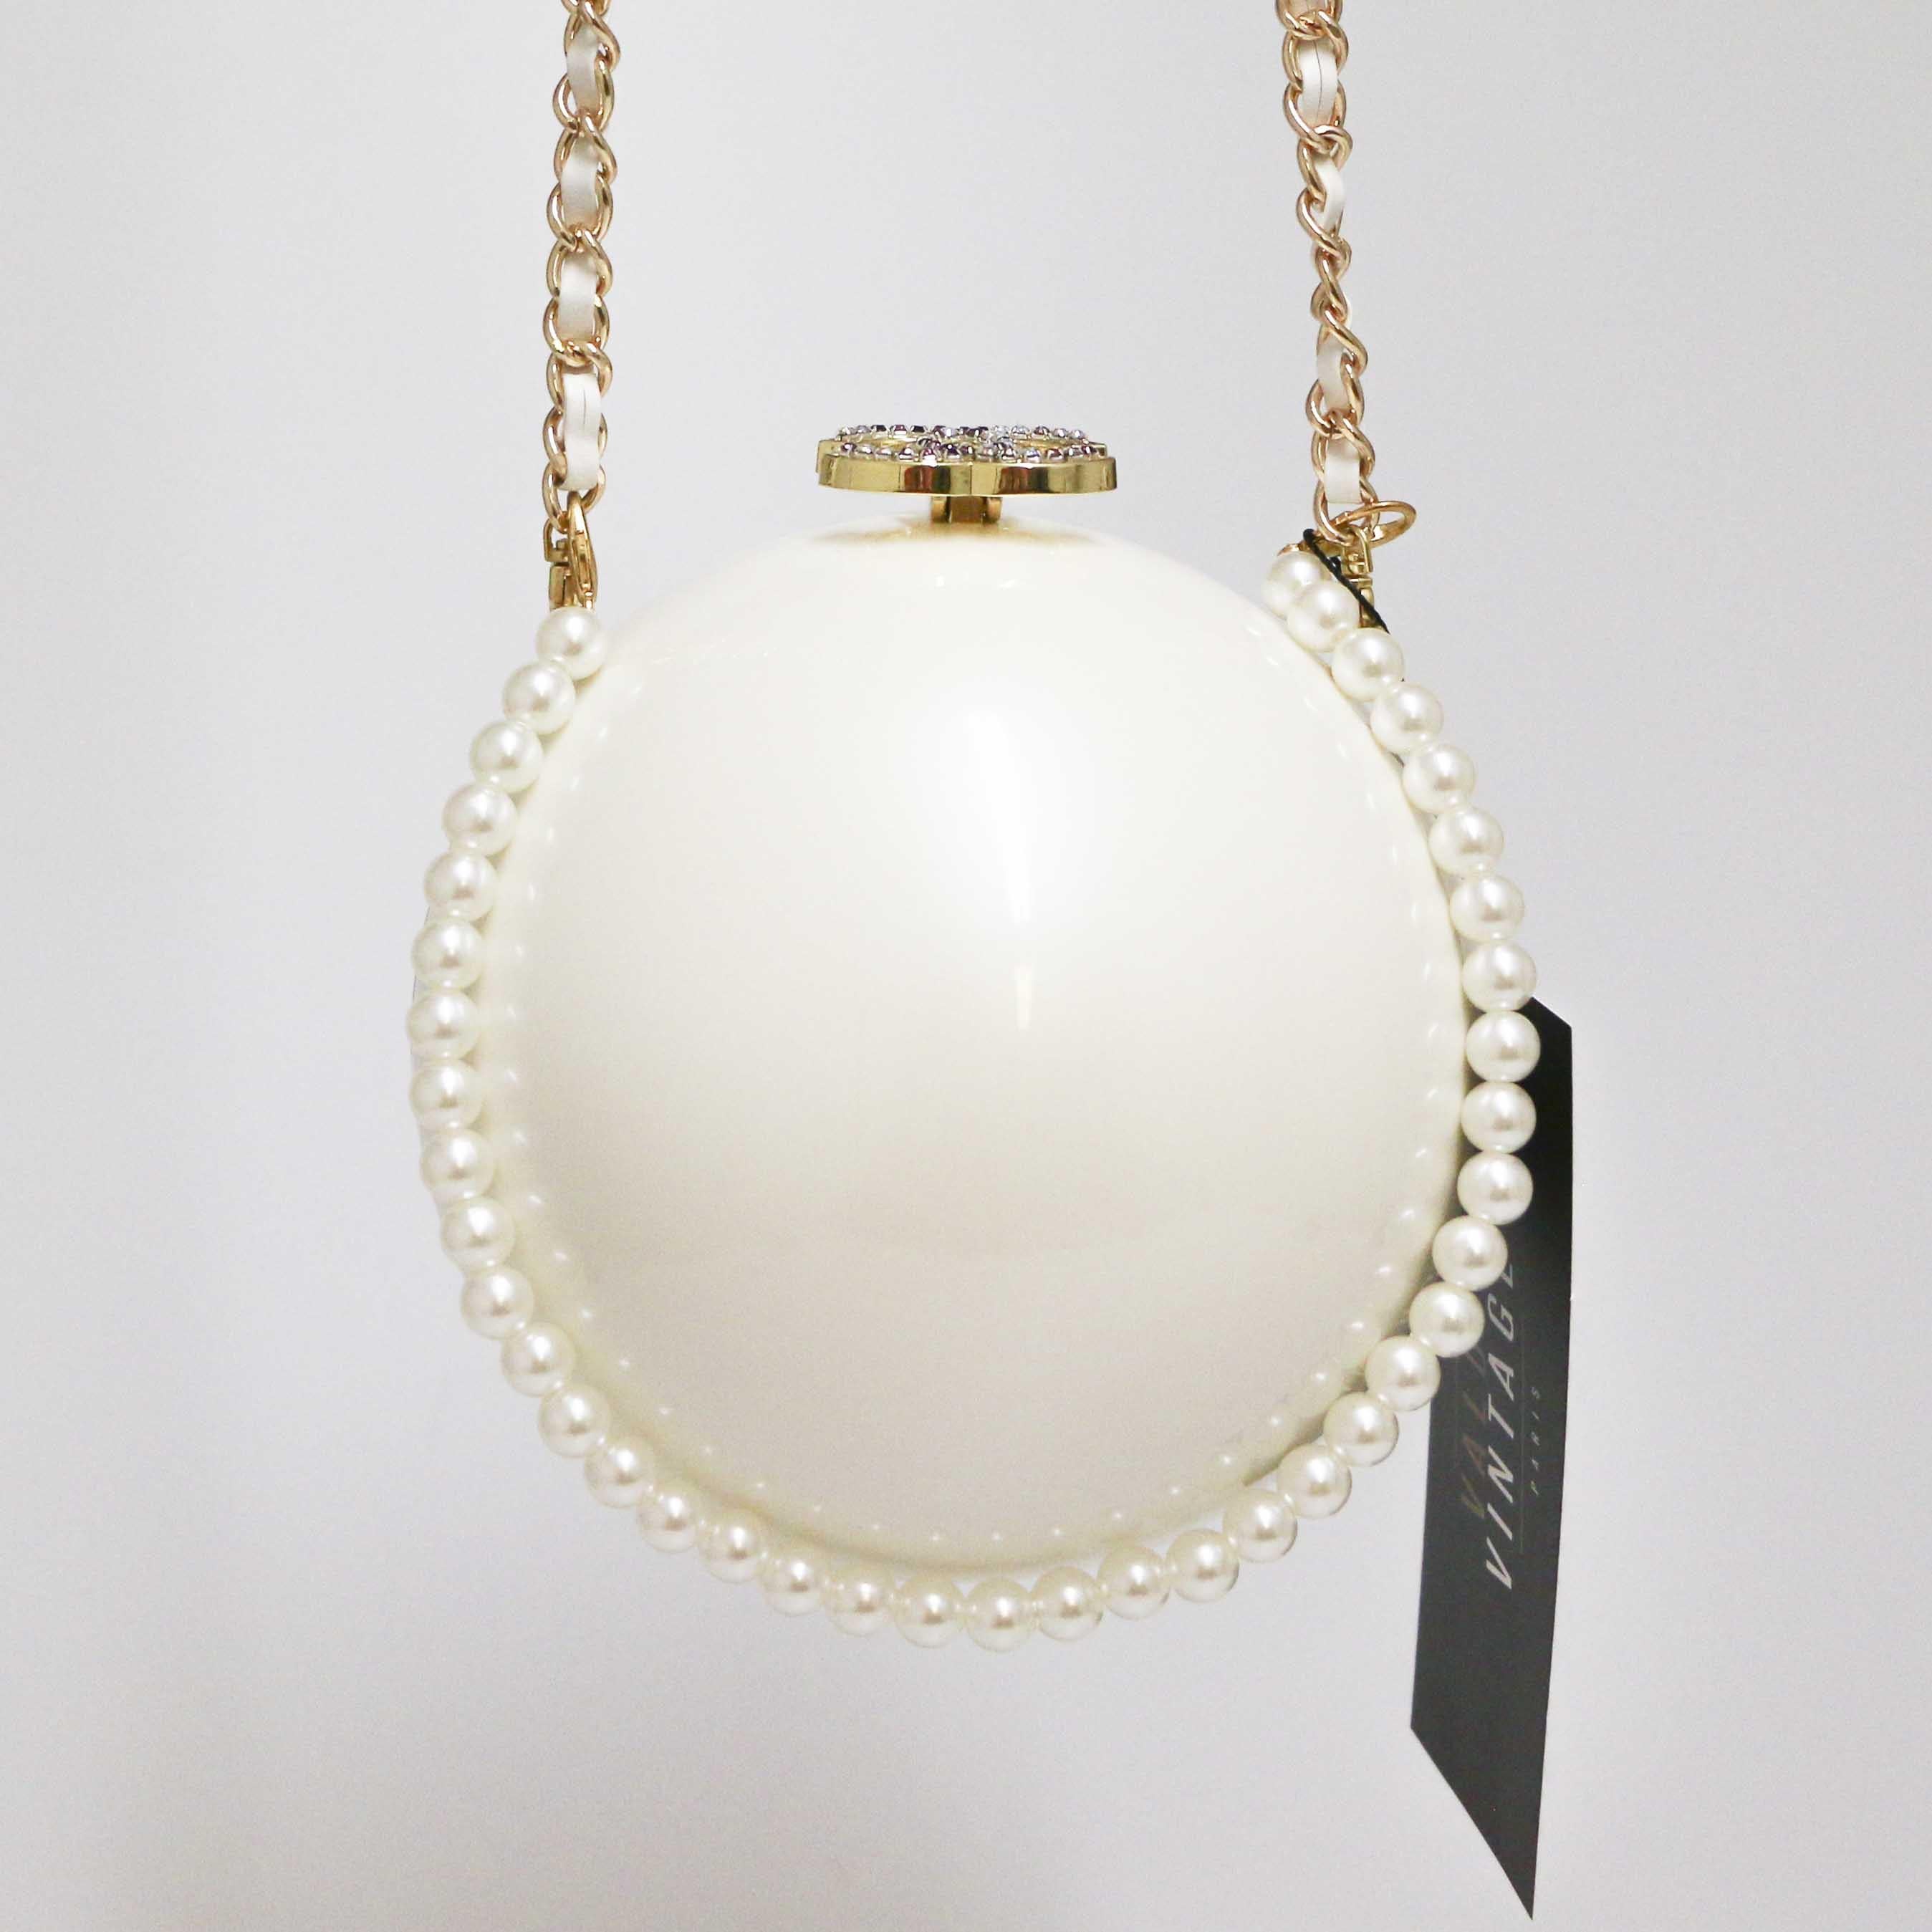 CHANEL ivory color sphere bag with pearl strap. It is made with plexiglass, CC set with rhinestones, handle chain in gilt metal. Toggle clasp. Removable double shoulder straps. The lining is in black velvet.
Worn crossbody or carried in the hand by